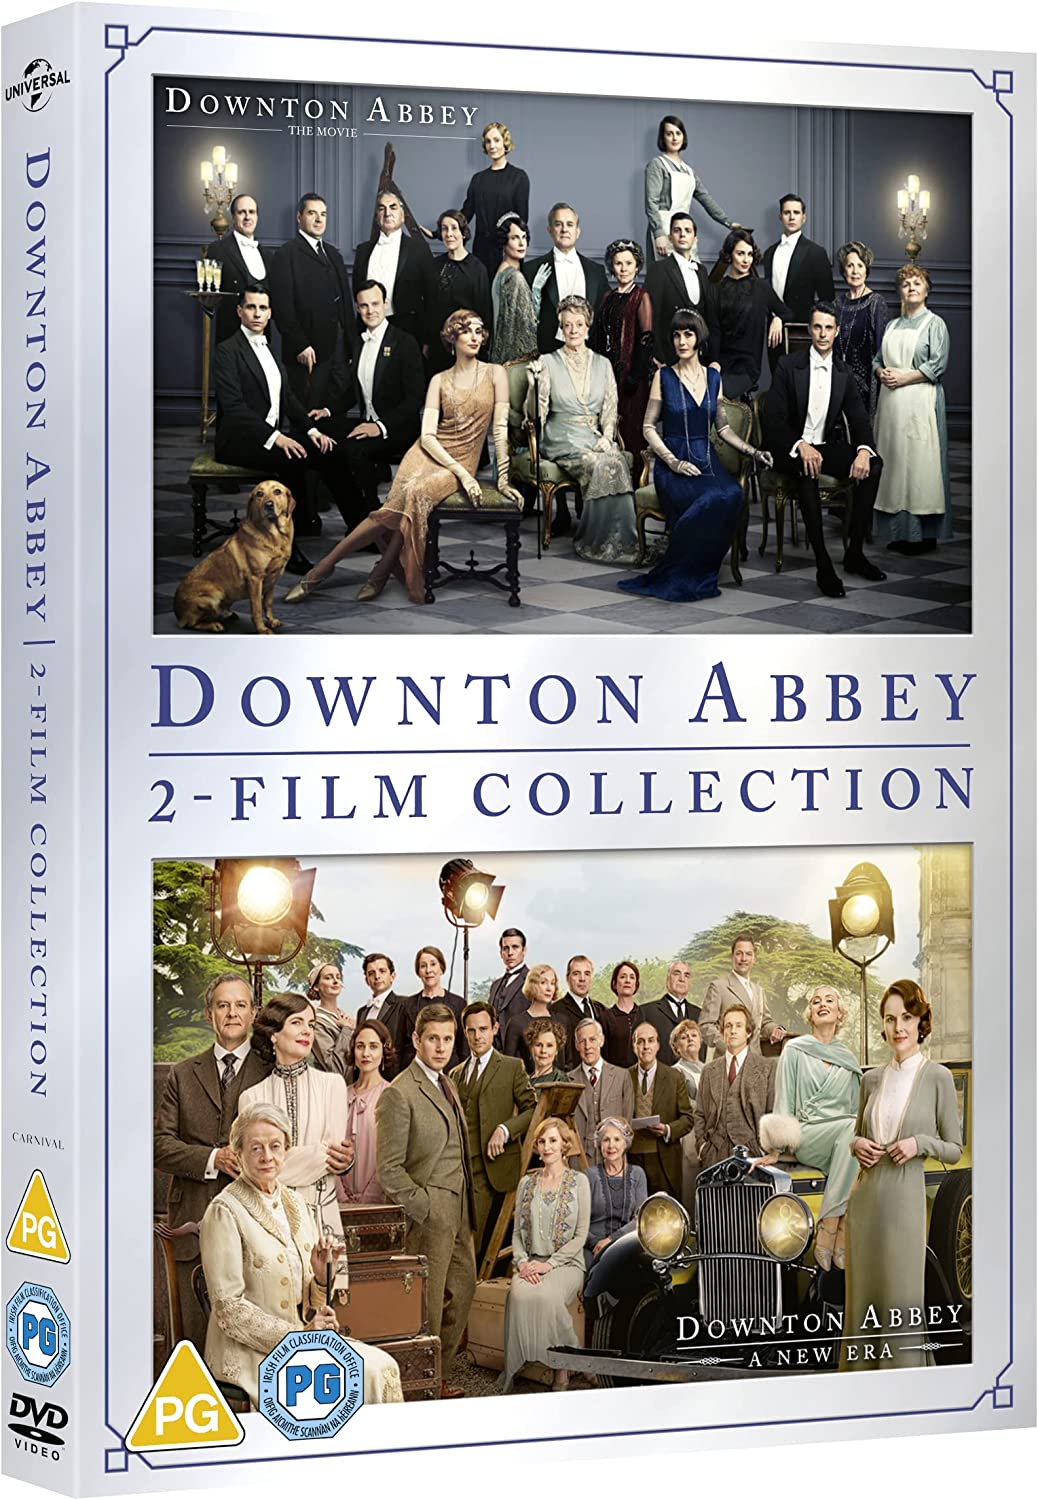 Downton Abbey 2-Film Collection [DVD]